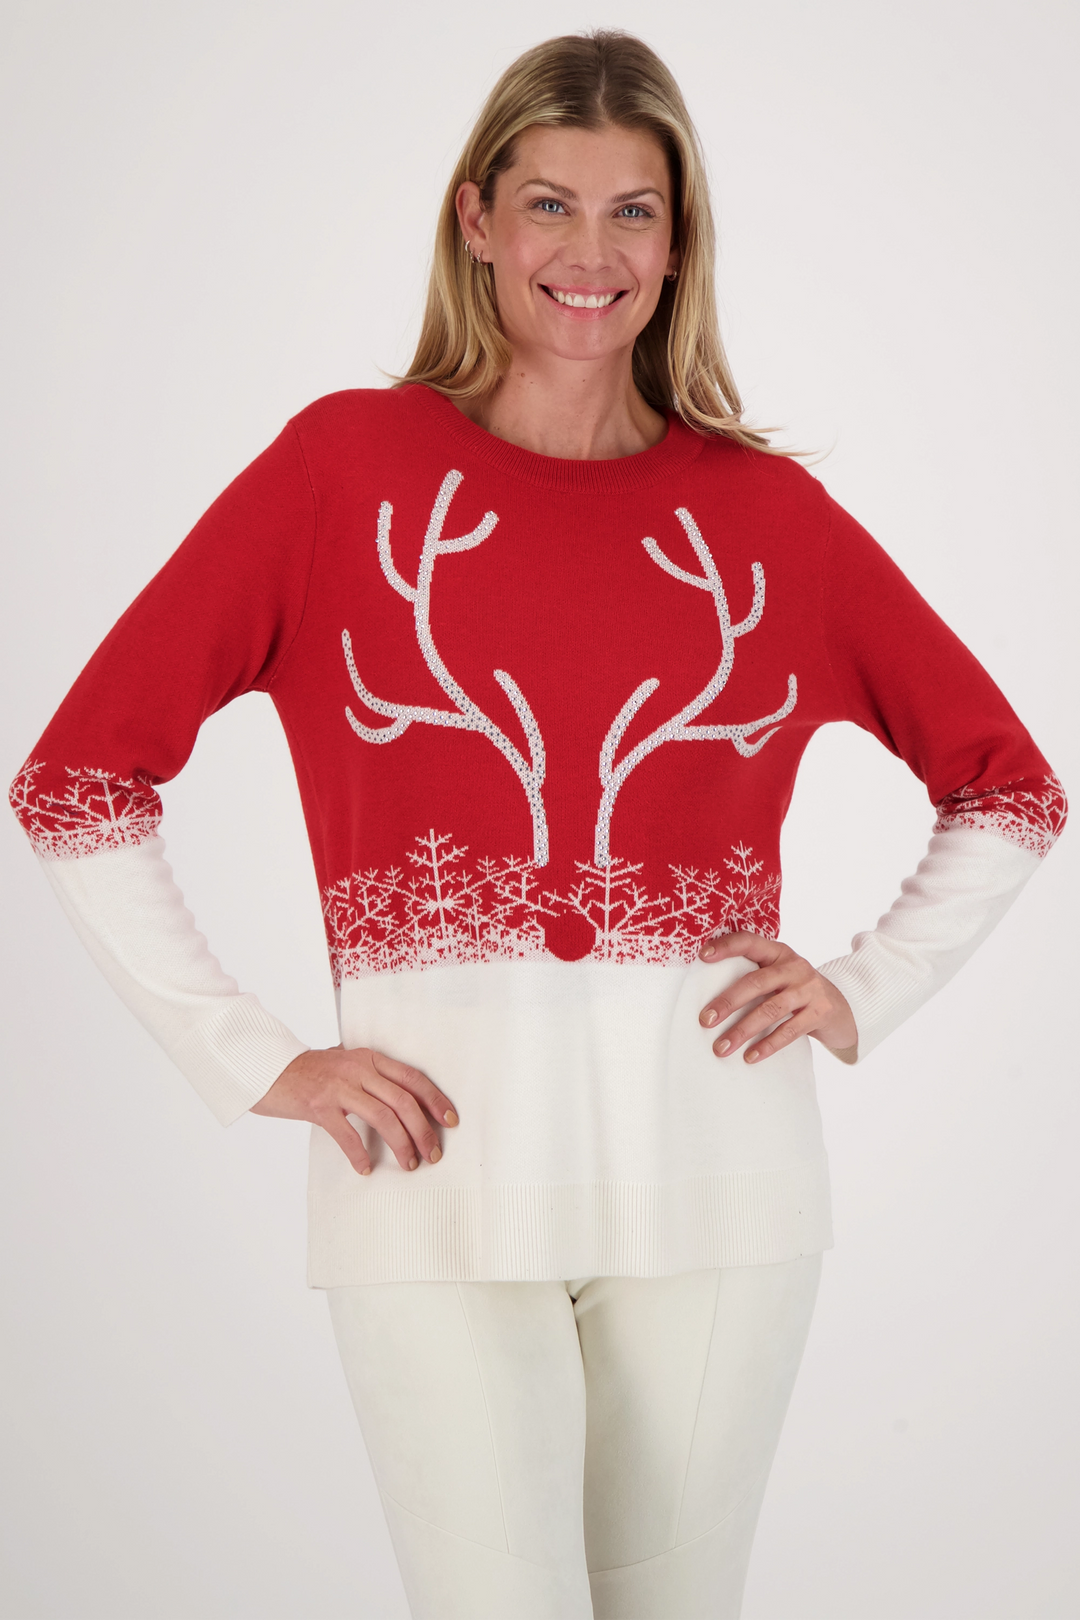 It is a festive light sweater with a colour contrast of red and snowy white, full length sleeves and a cute reindeer with a red nose! 